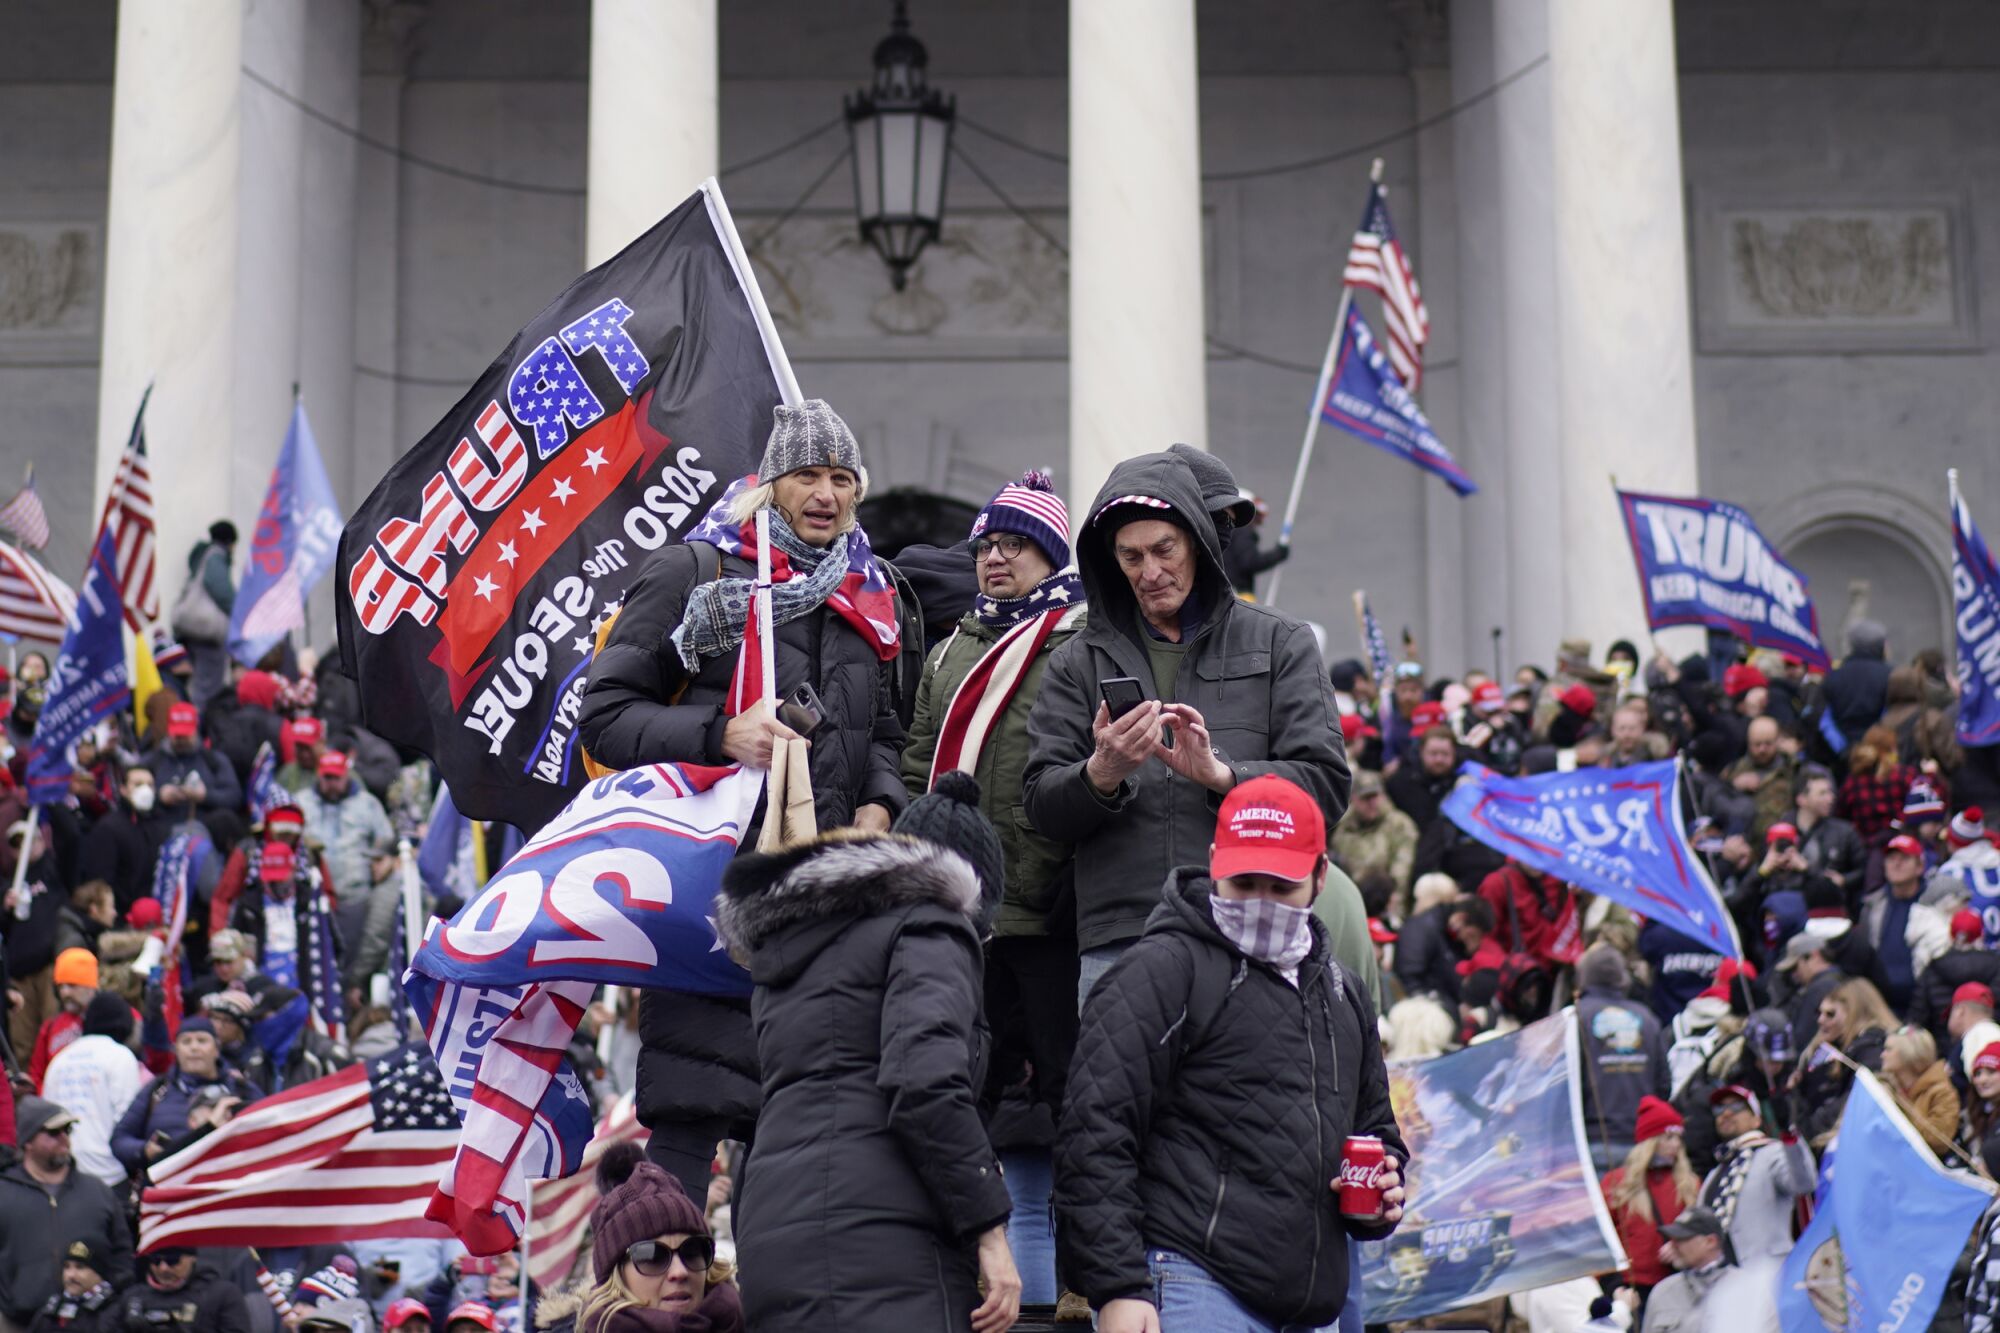 Protesters with pro-Trump flags gather at the U.S. Capitol in Washington on Jan. 6, 2021.